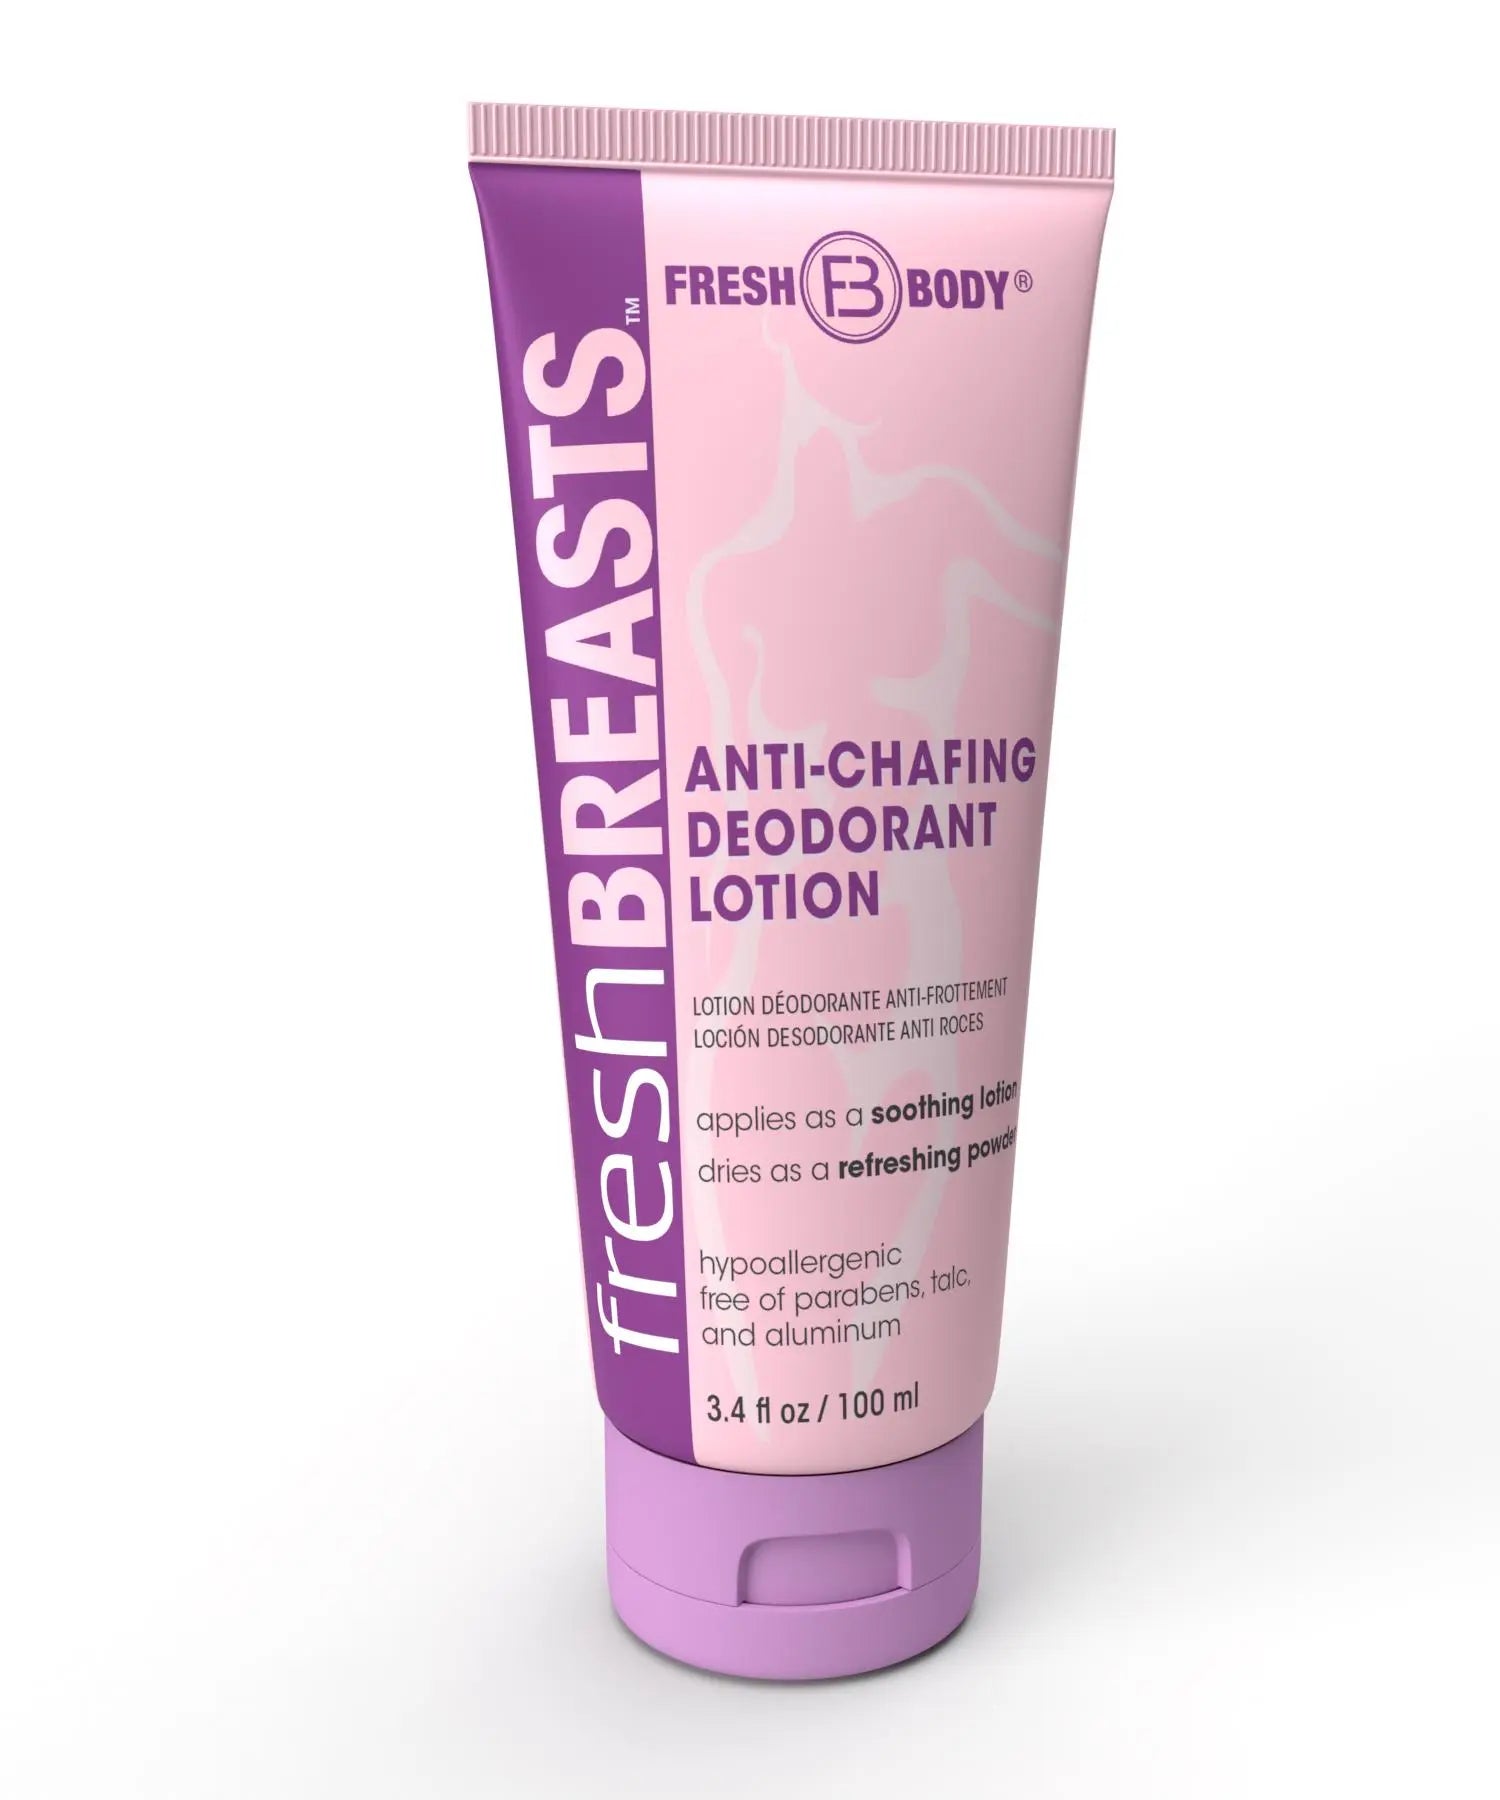  Fresh BREASTS Anti-Chafing Deodorant Cream to Powder for Under  Boobs, Inner Thighs - Lotion Made without Talc, Aluminum, Parabens or Added  Fragrance - 3.4 Fl Oz (2 Pack) : Beauty & Personal Care